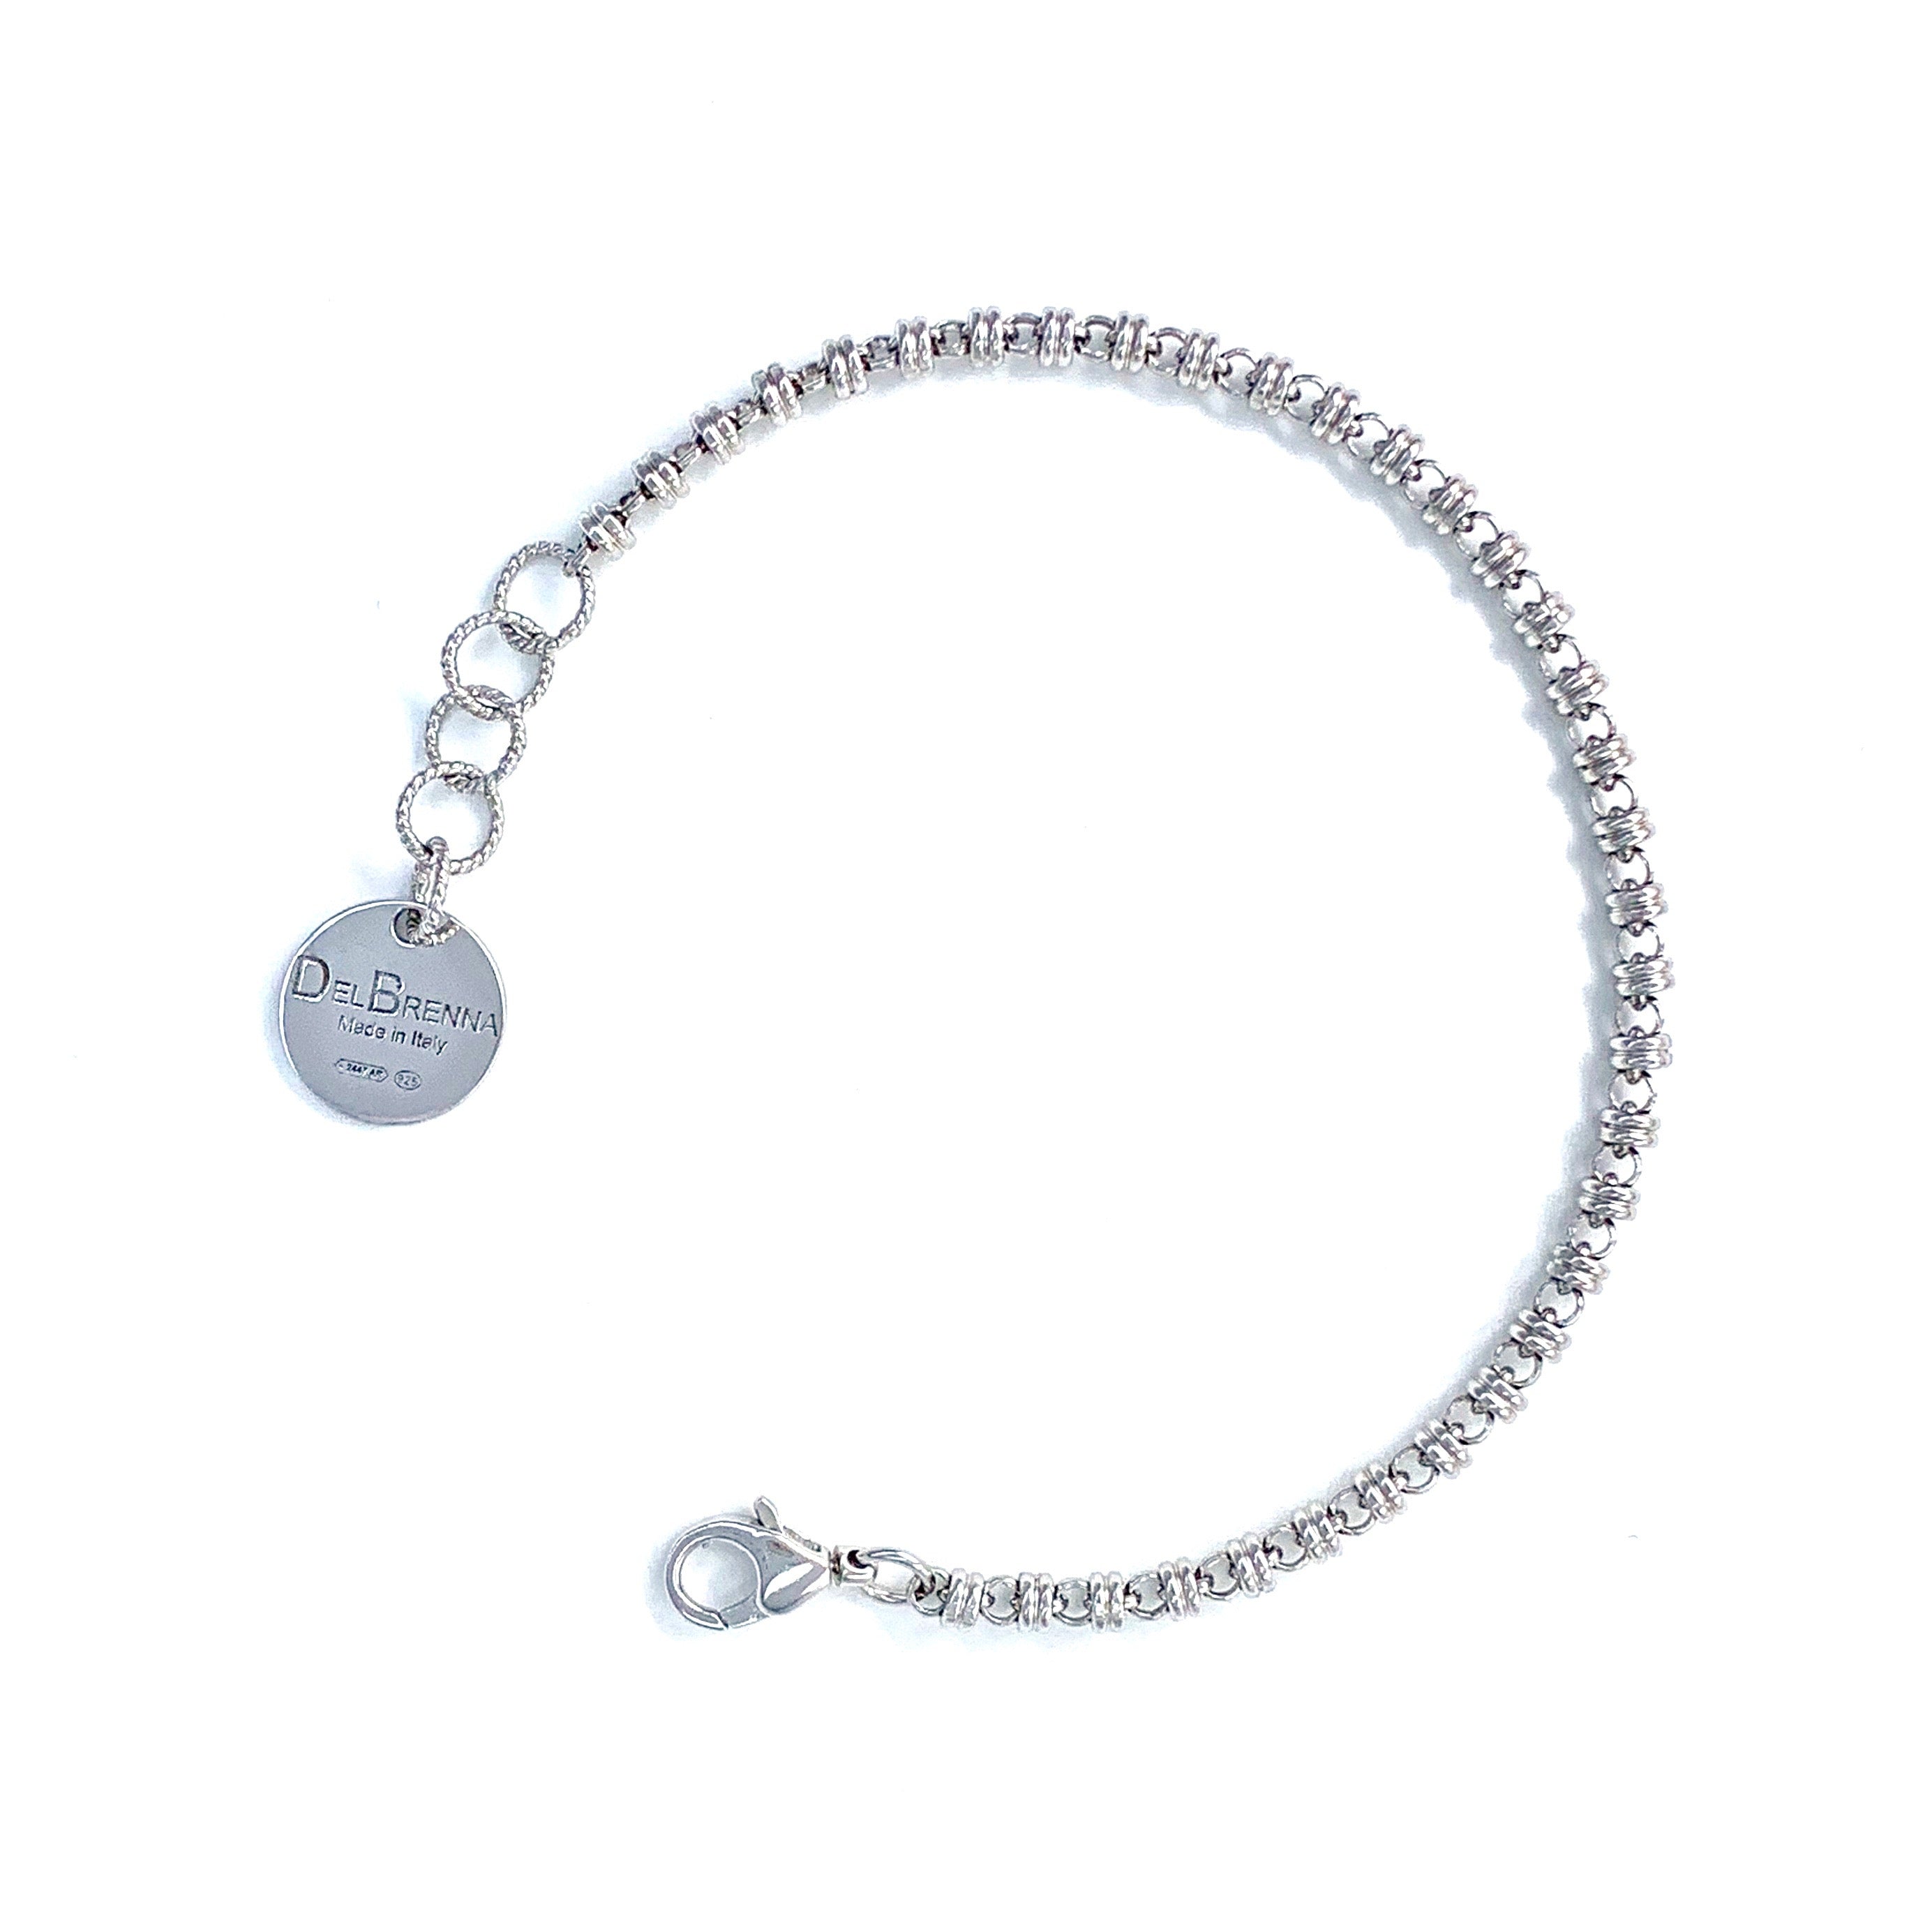 A silver chain bracelet with a round silver charm with the DelBrenna brand name against a white background. The silver bracelet has been handcrafted in Tuscany by DelBrenna Italian Jewelry artisans and designers. 